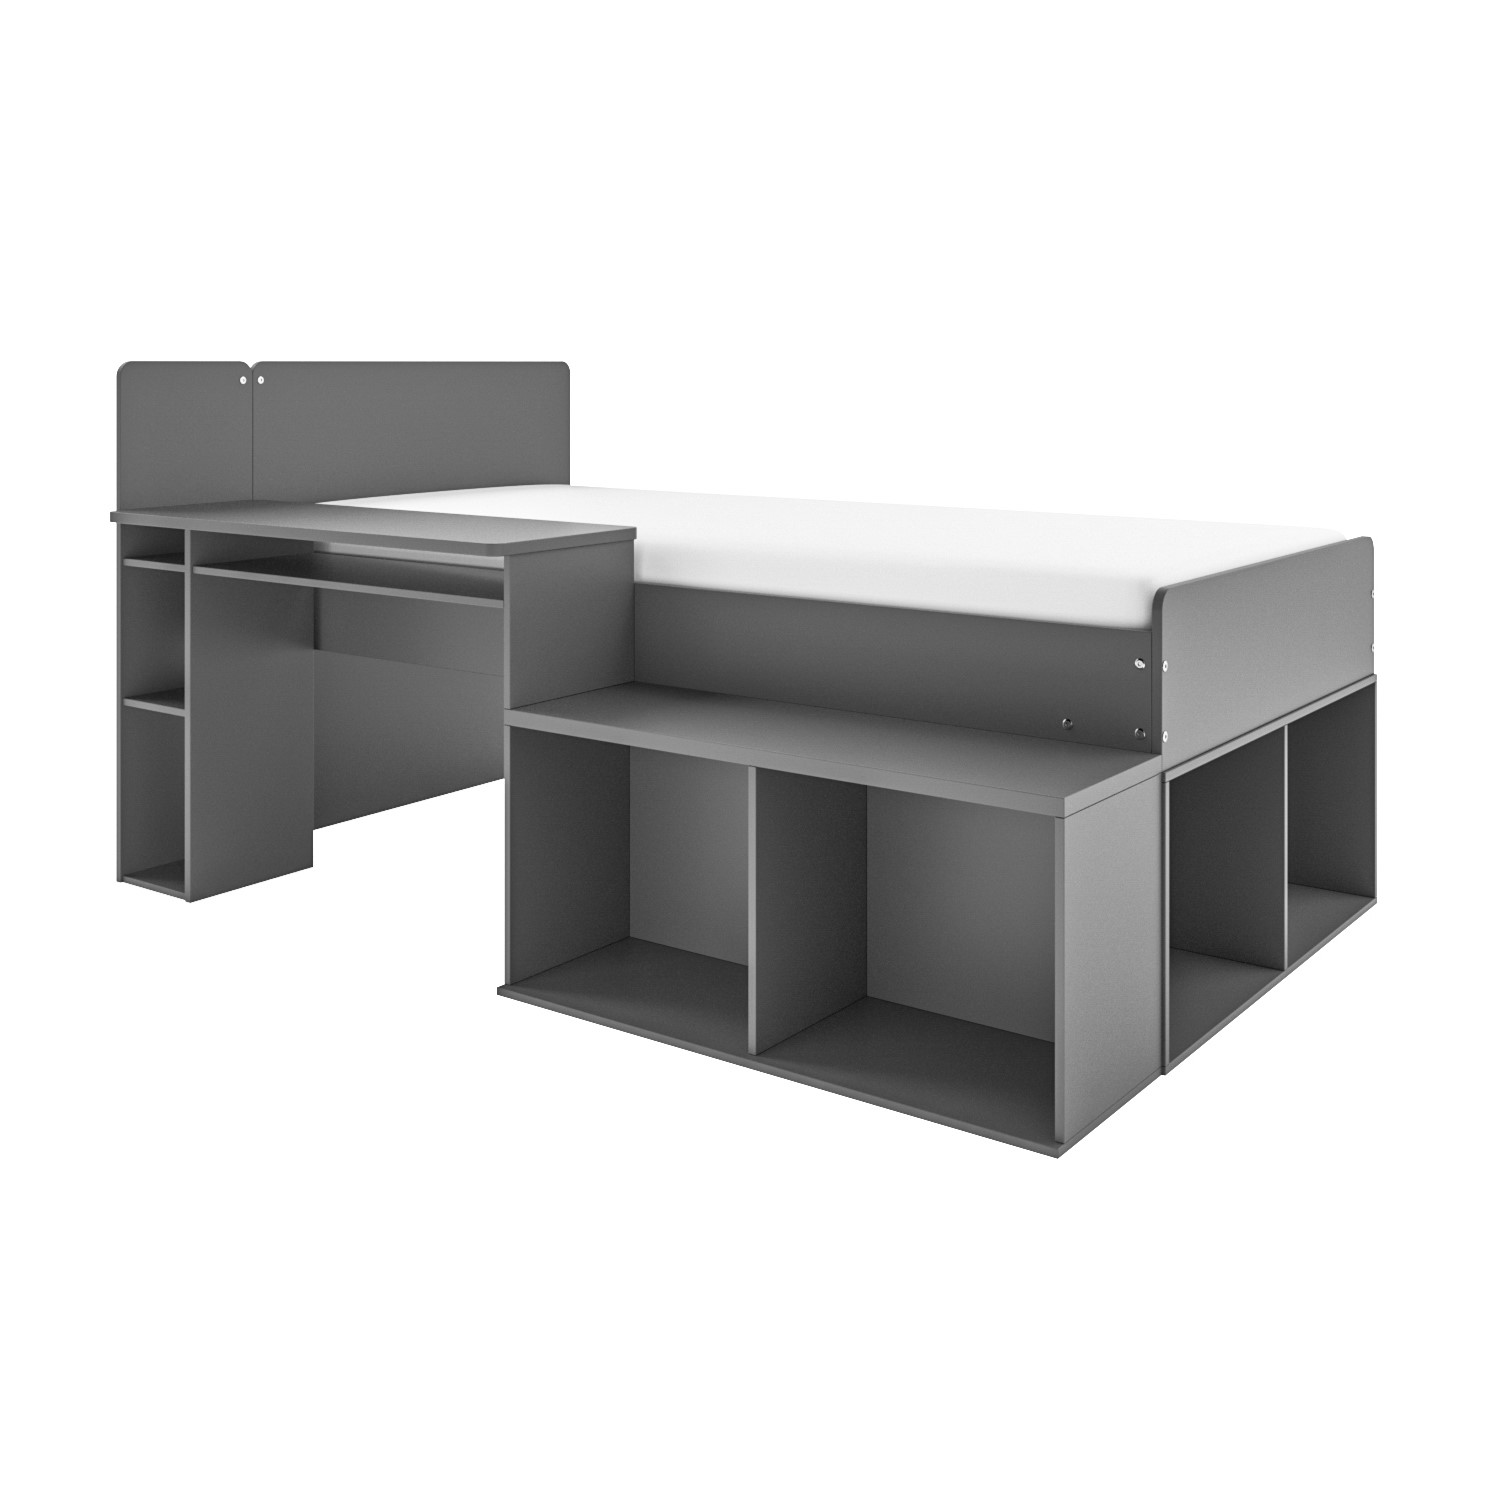 Read more about Grey cabin bed with desk and storage ellison